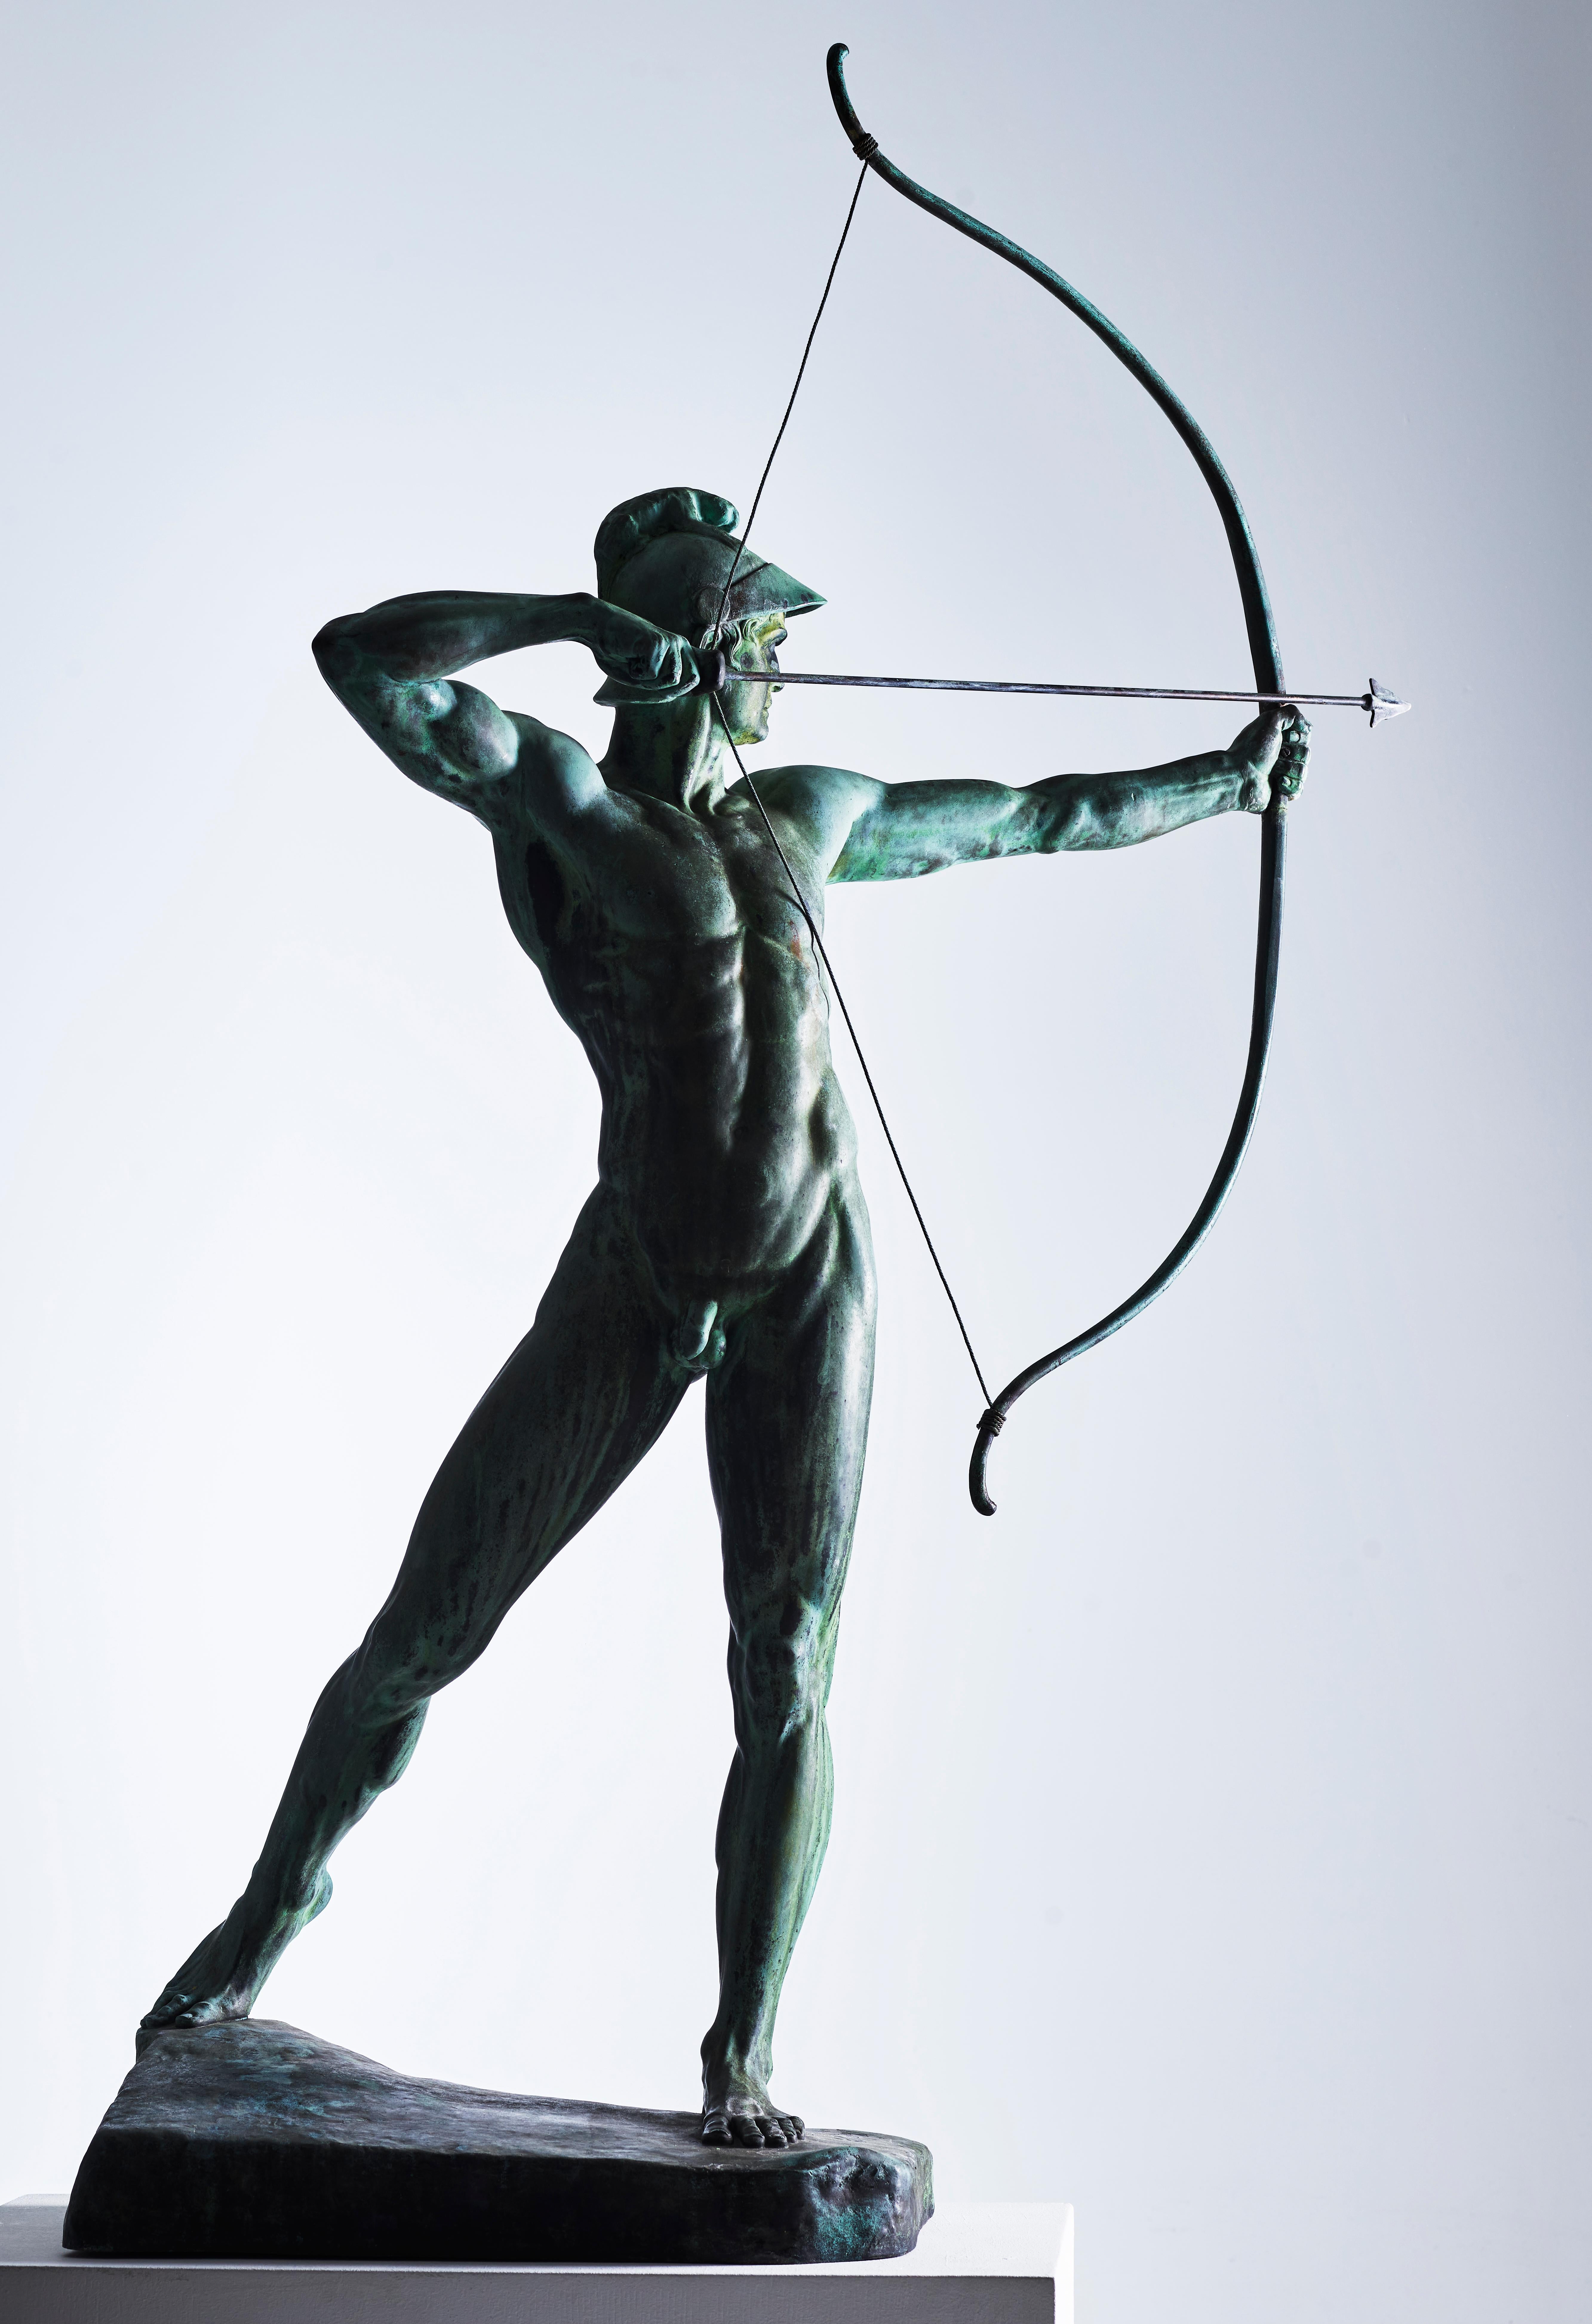 Ernst Moritz Geyger, German (1861-1941). An spectacular bronze figure of ’The Archer’, the standing naked figure wearing a helmet, drawing a bow, raised on a naturalistically cast base, signed and dated: E.M. GEYGER FEC. 

Geyger began work on the